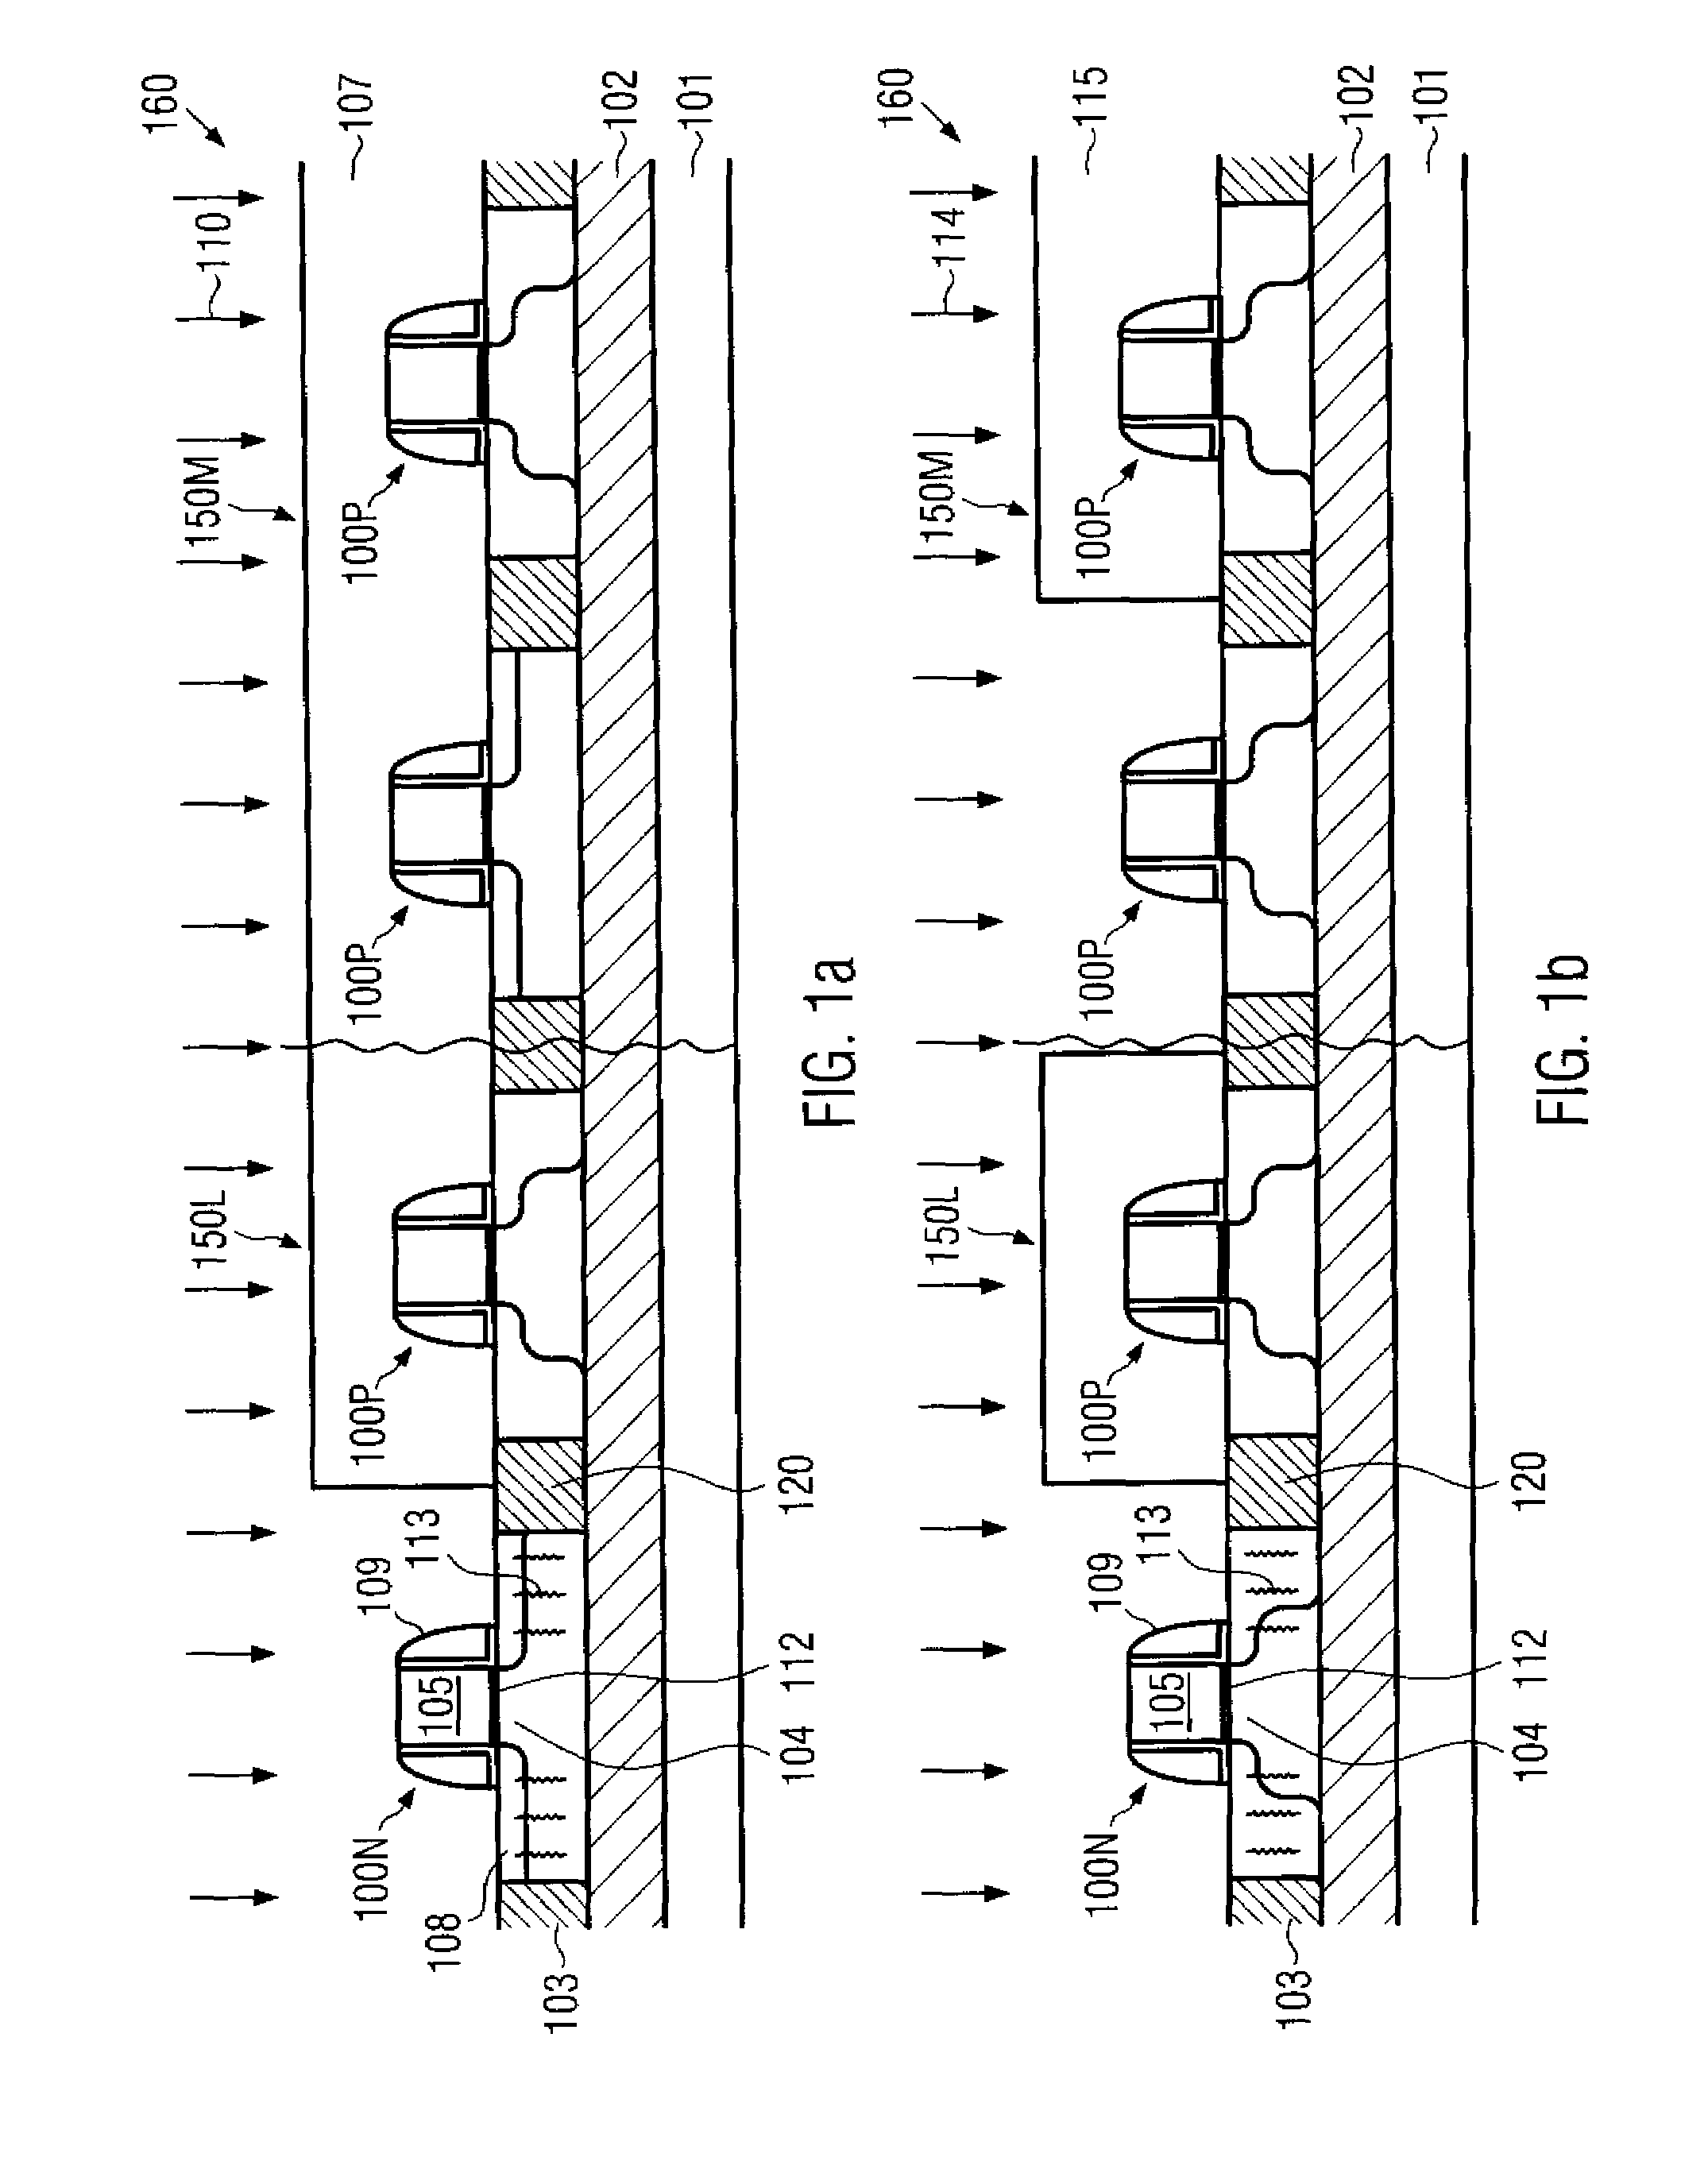 Semiconductor device having stressed etch stop layers of different intrinsic stress in combination with PN junctions of different design in different device regions